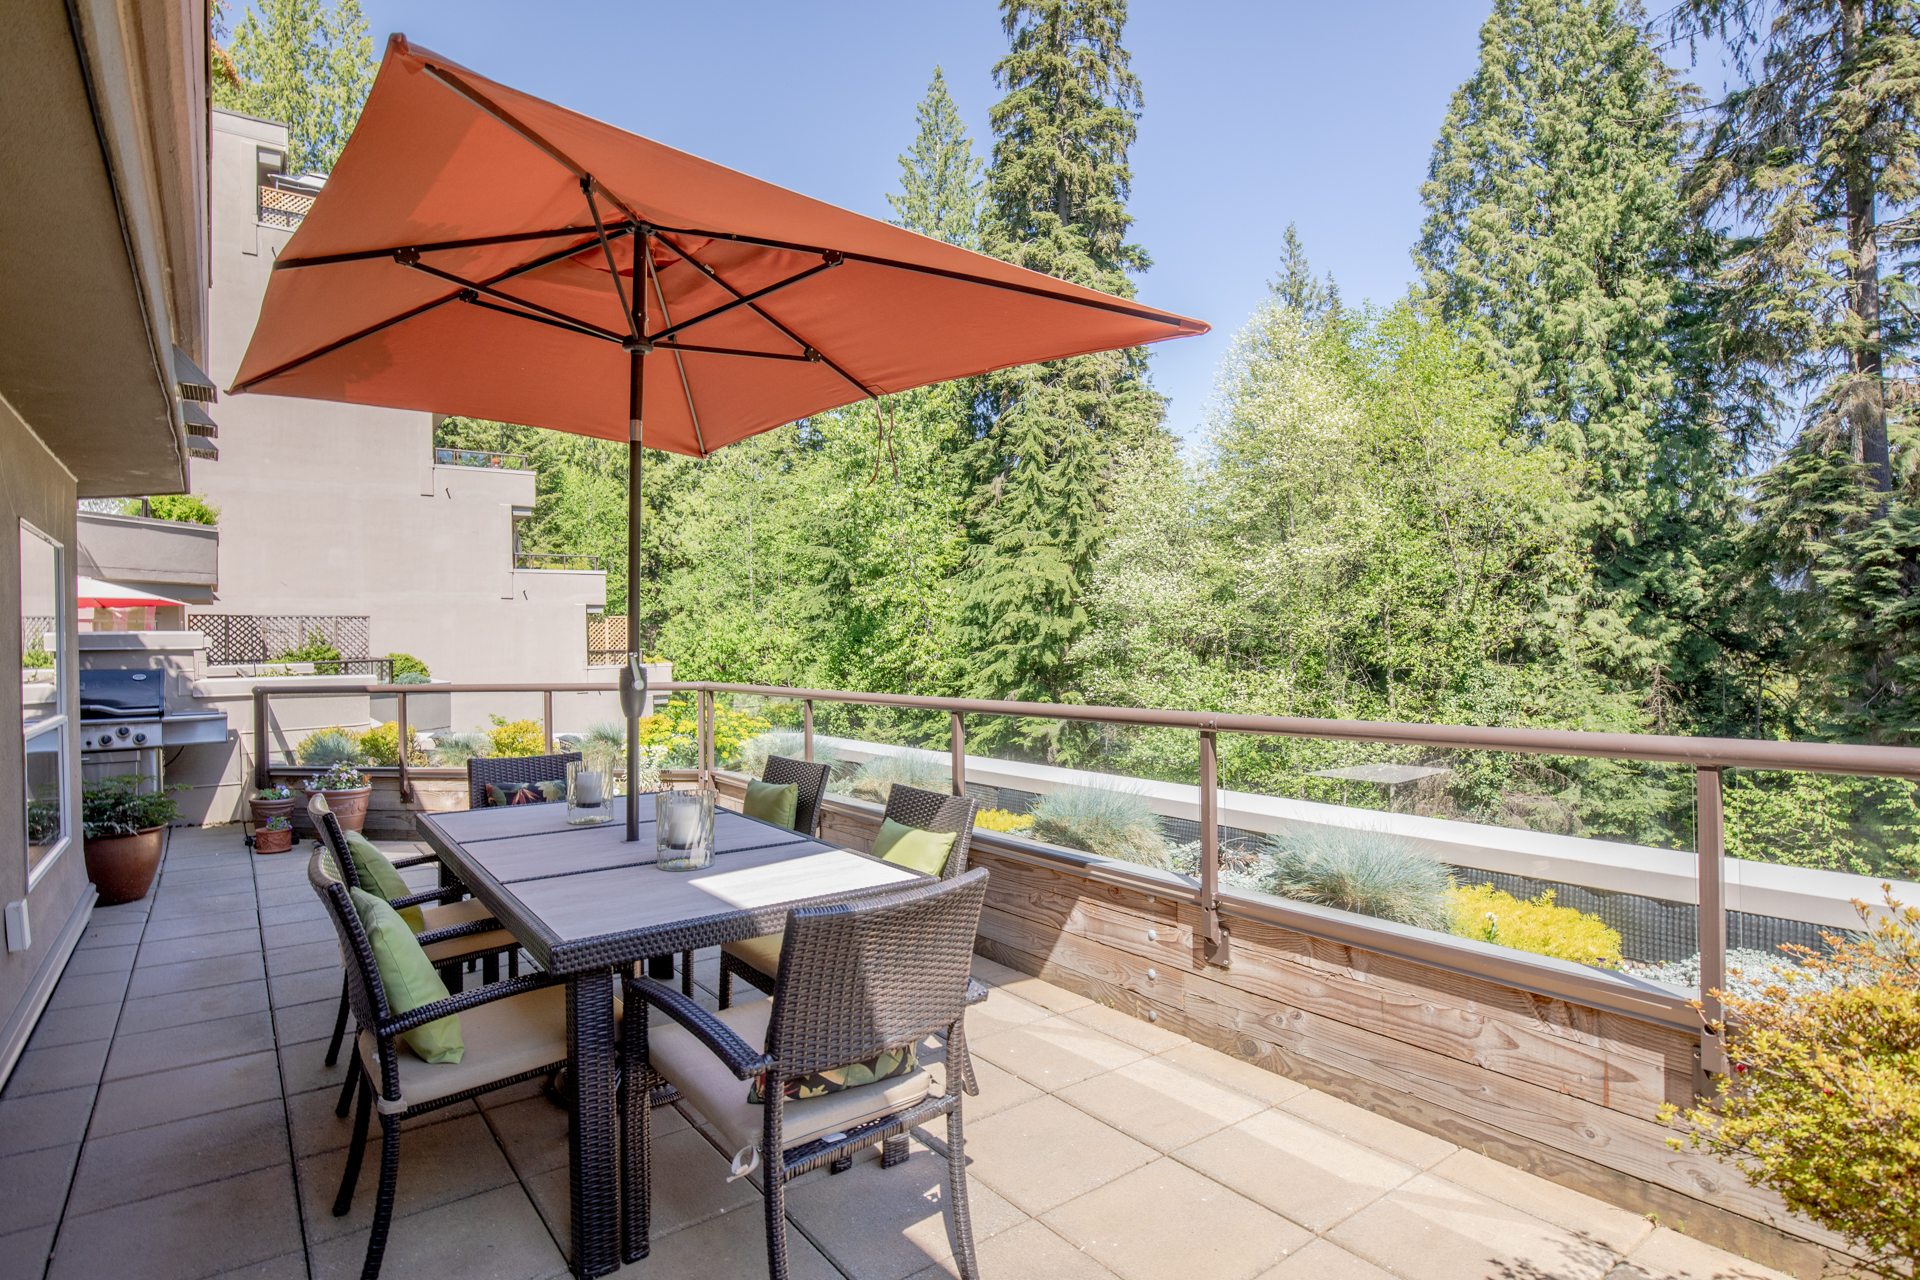 north vancouver condos for sale with great outdoor spaces